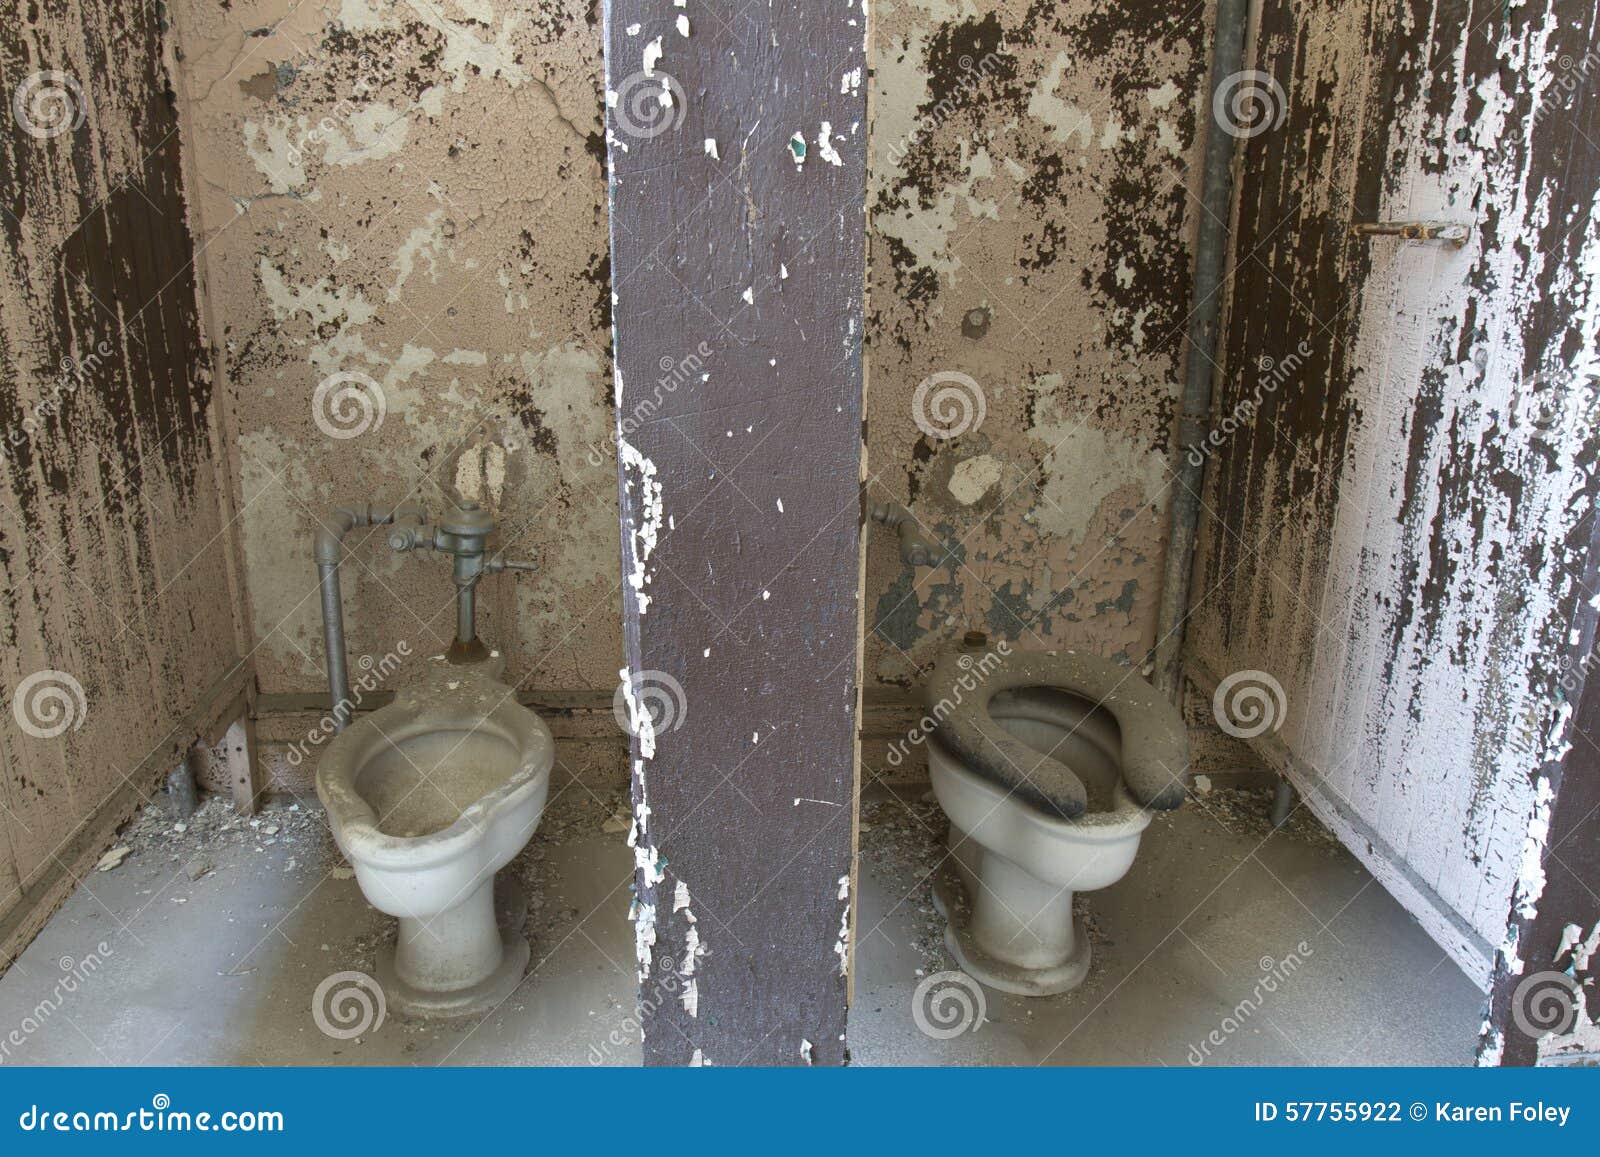 Dirty Decaying Toilet Stalls Stock Photo Image Of Stall Bathroom 57755922